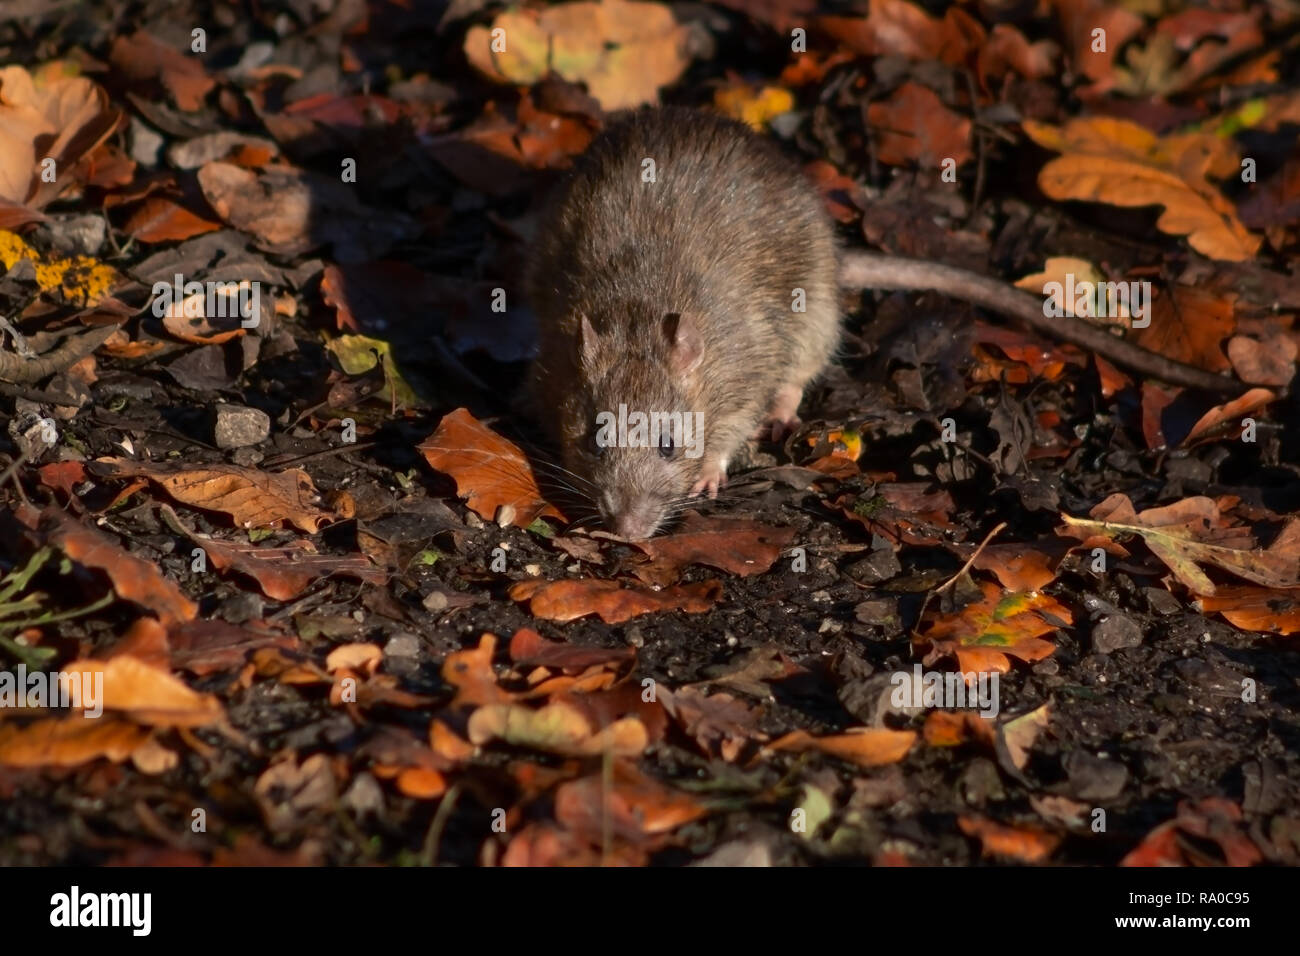 Wild Brown Rat scavenging among the fallen autumn leaves on the woodland floor Stock Photo